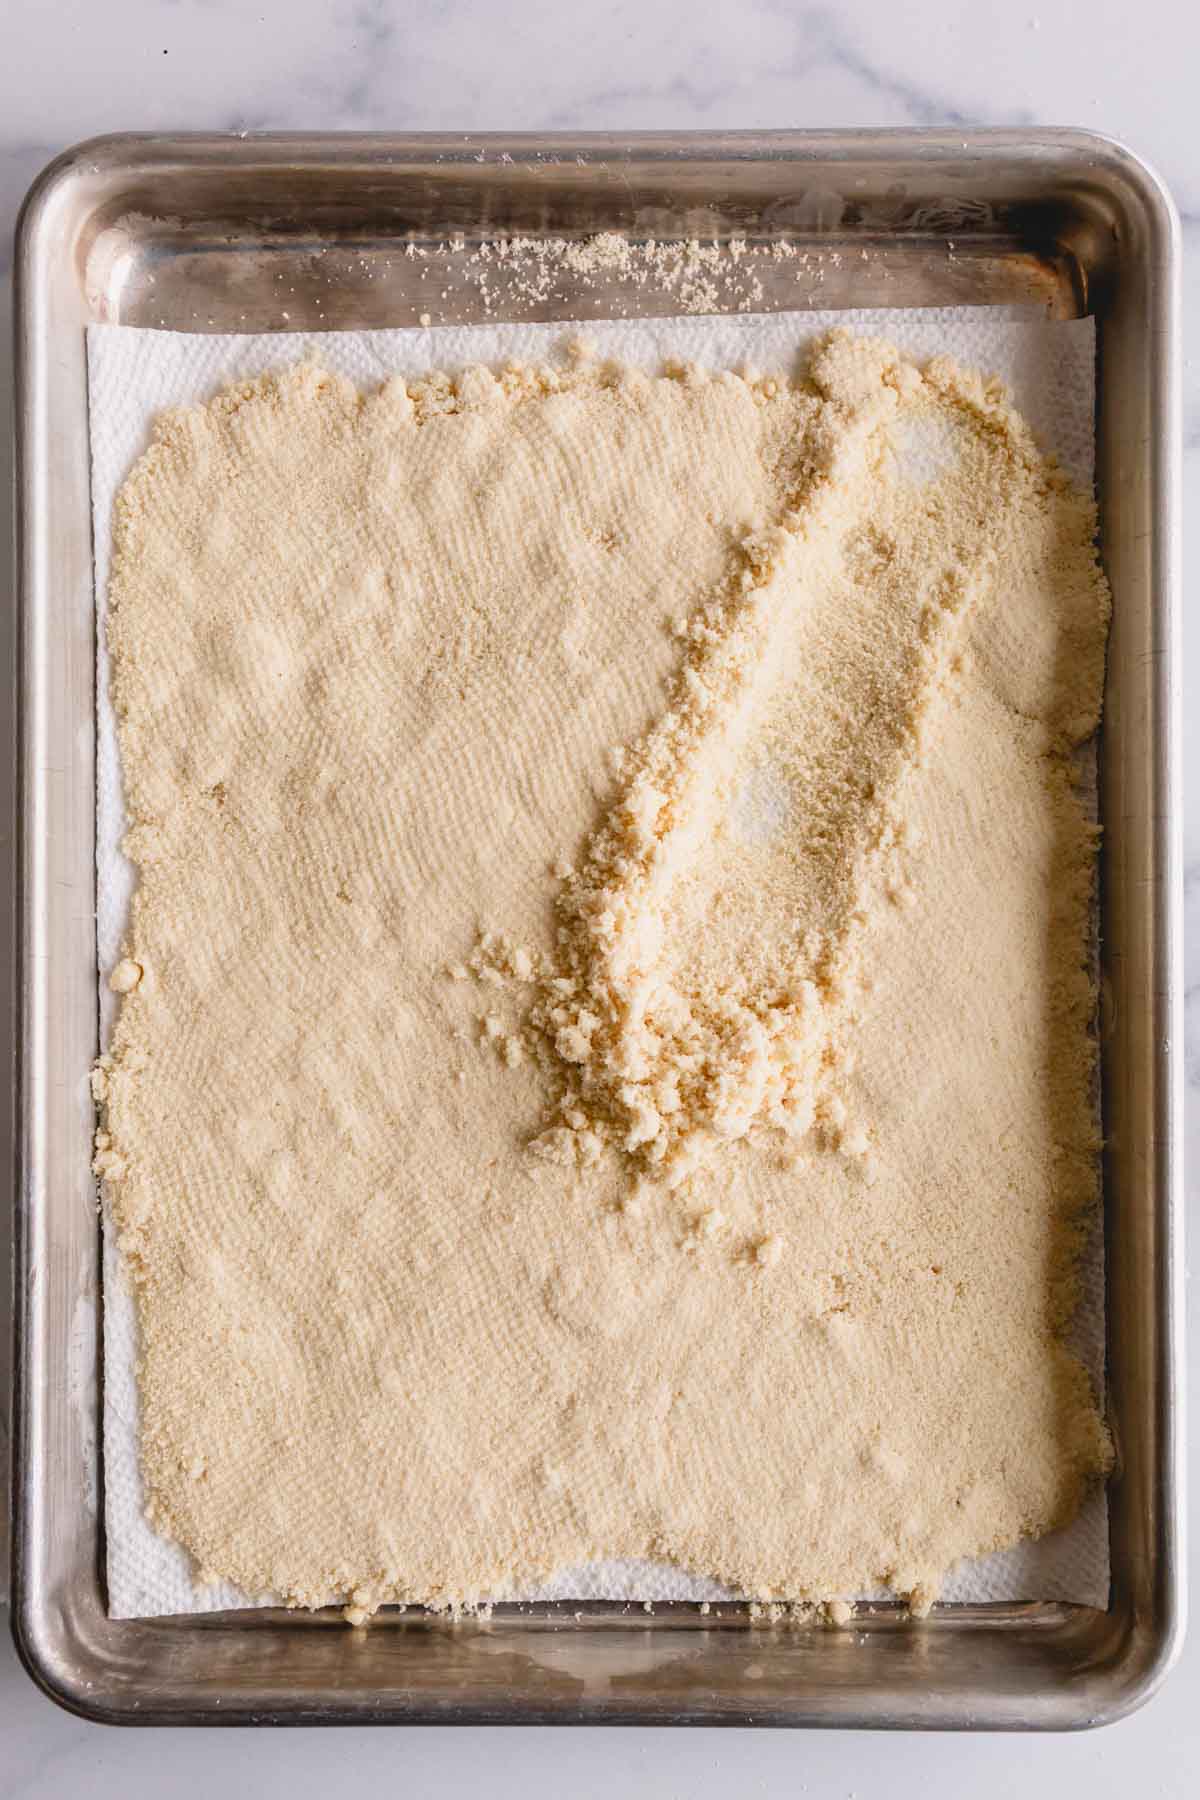 A layer of almond flour on a baking sheet lined with paper towel and some fluffe with a spoon.